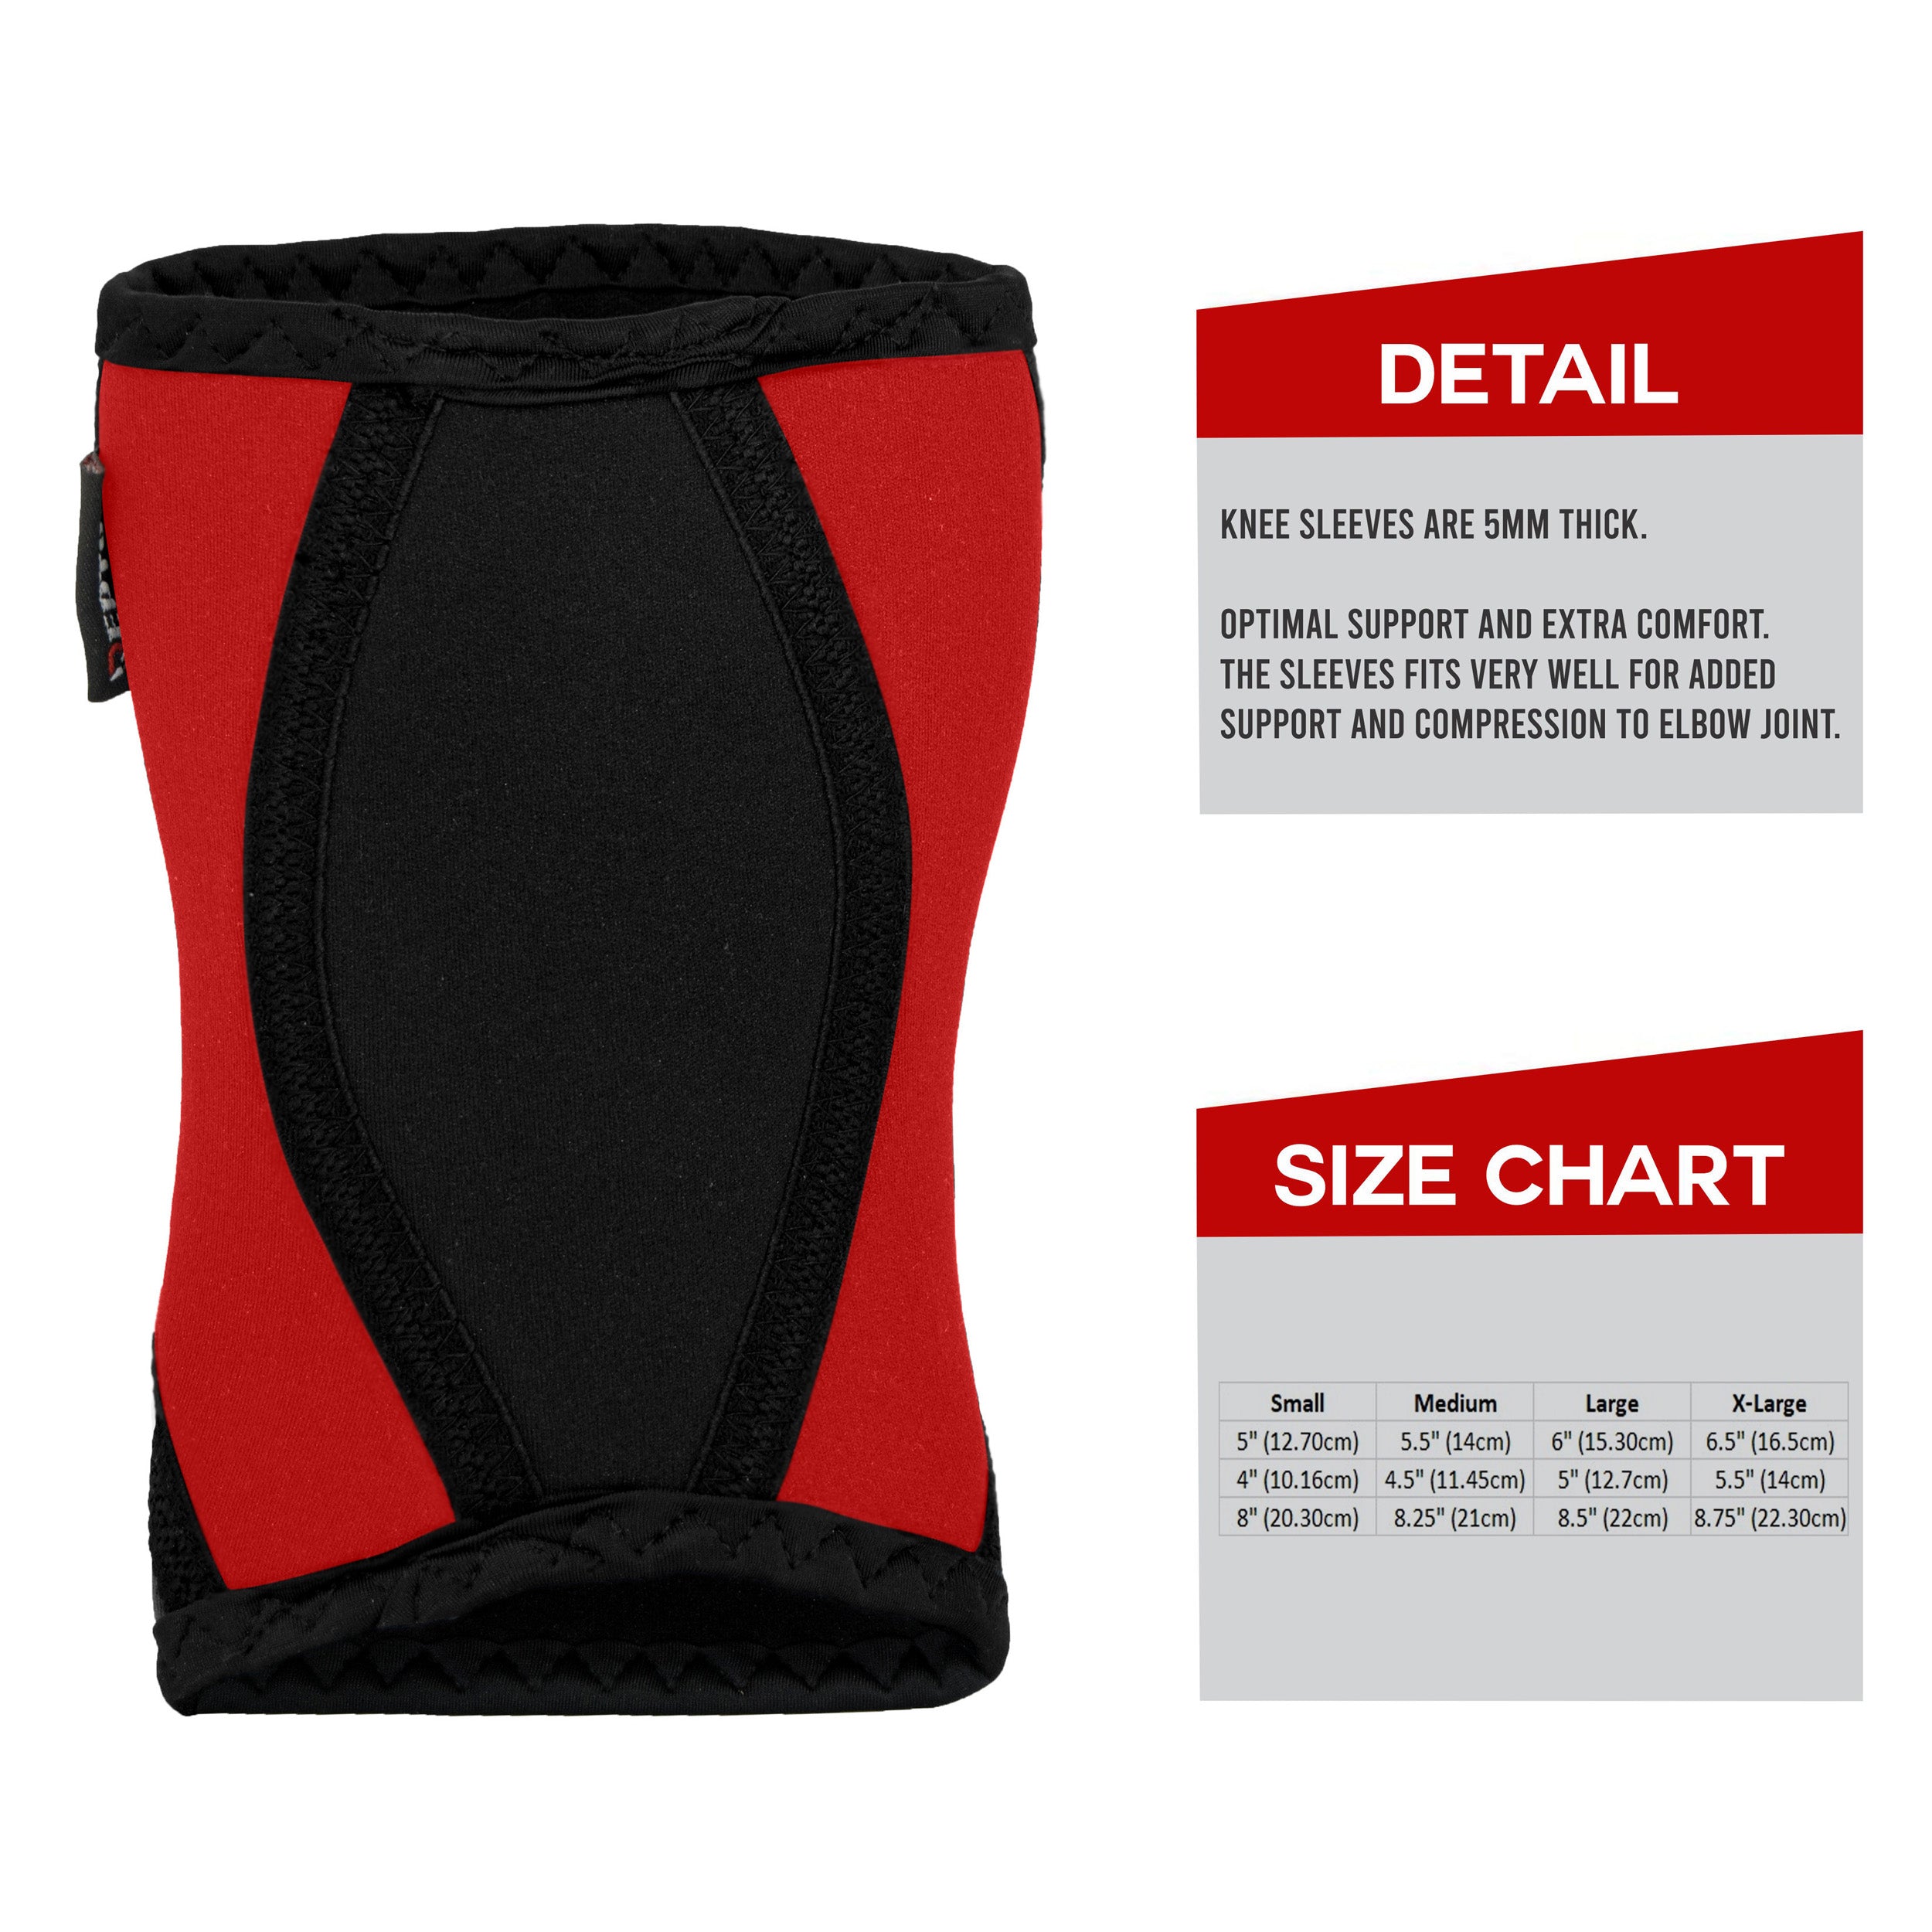 Knee Sleeve Pair Power Lifting Patella Support Brace Knee Protector Repton Fitness Gear